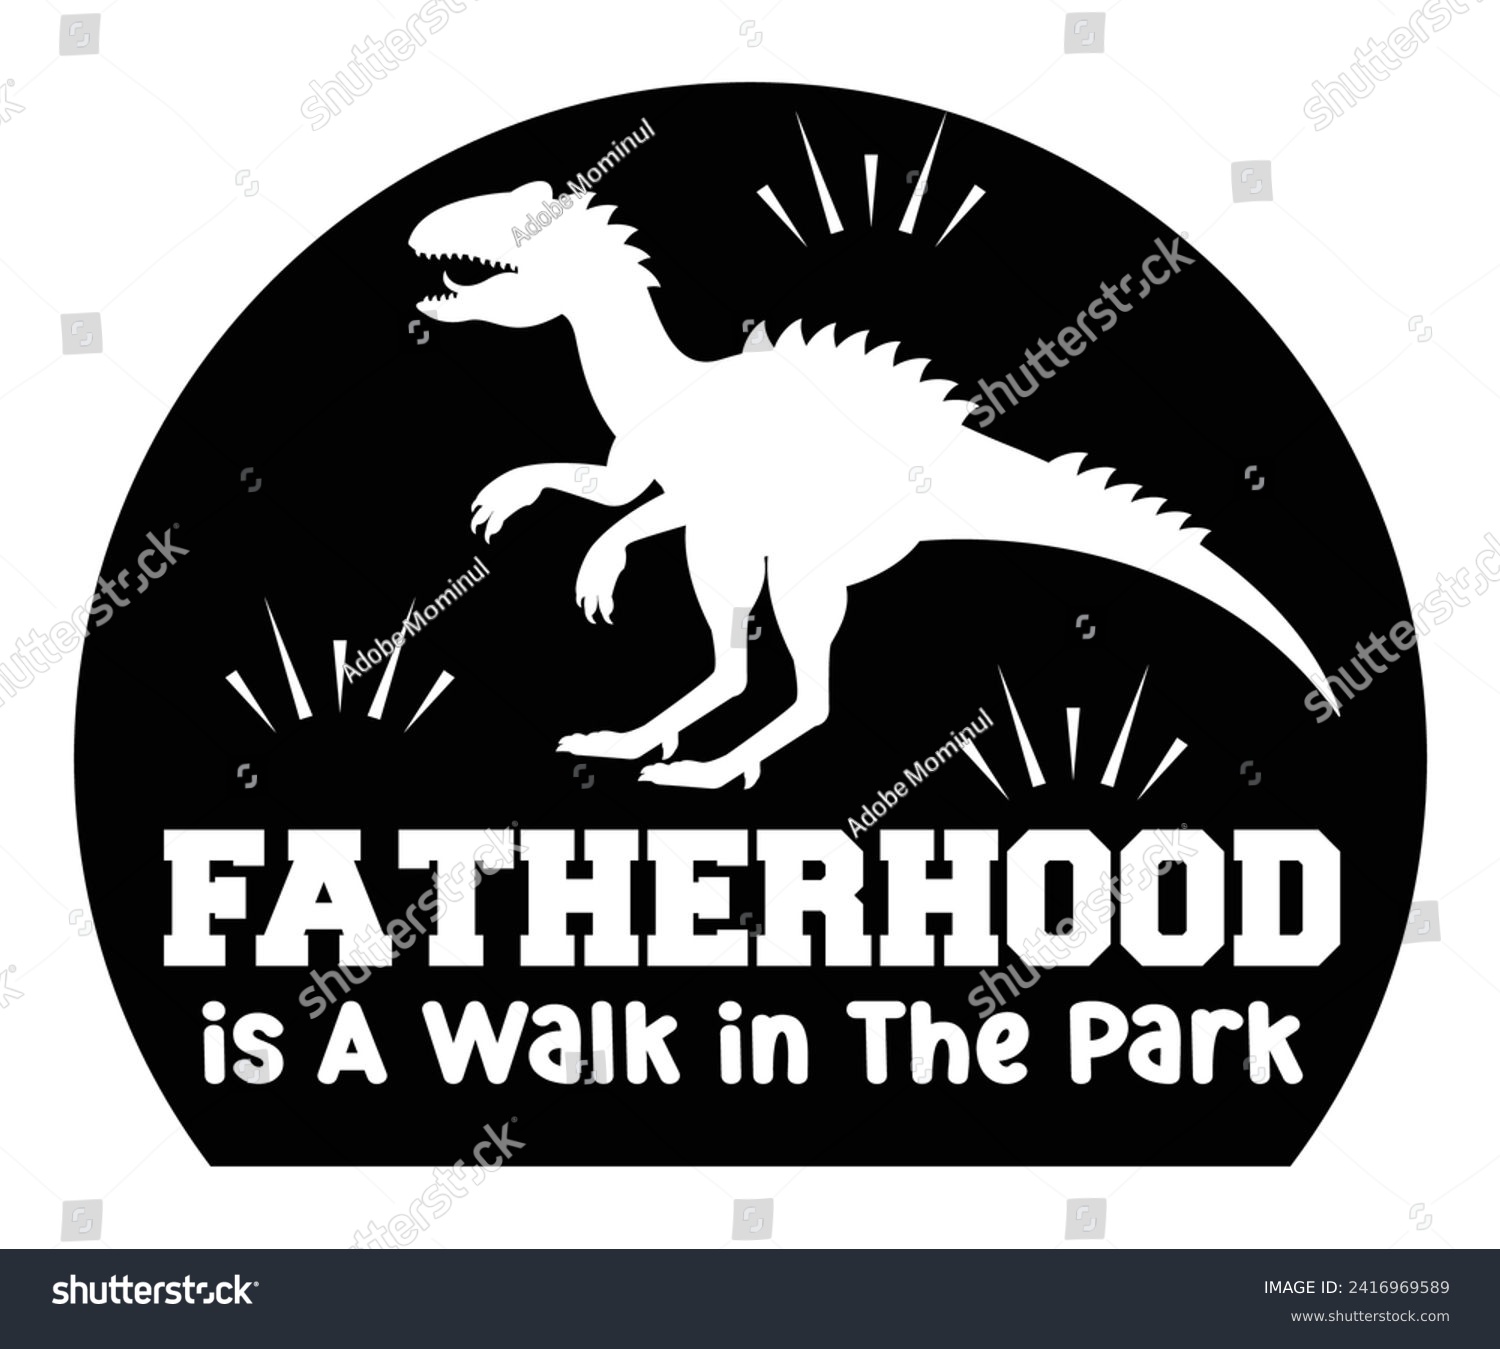 SVG of Fatherhood is A Walk in The Park Svg,Father's Day Svg,Papa svg,Grandpa Svg,Father's Day Saying Qoutes,Dad Svg,Funny Father, Gift For Dad Svg,Daddy Svg,Family Svg,T shirt Design,Svg Cut File,Typography svg